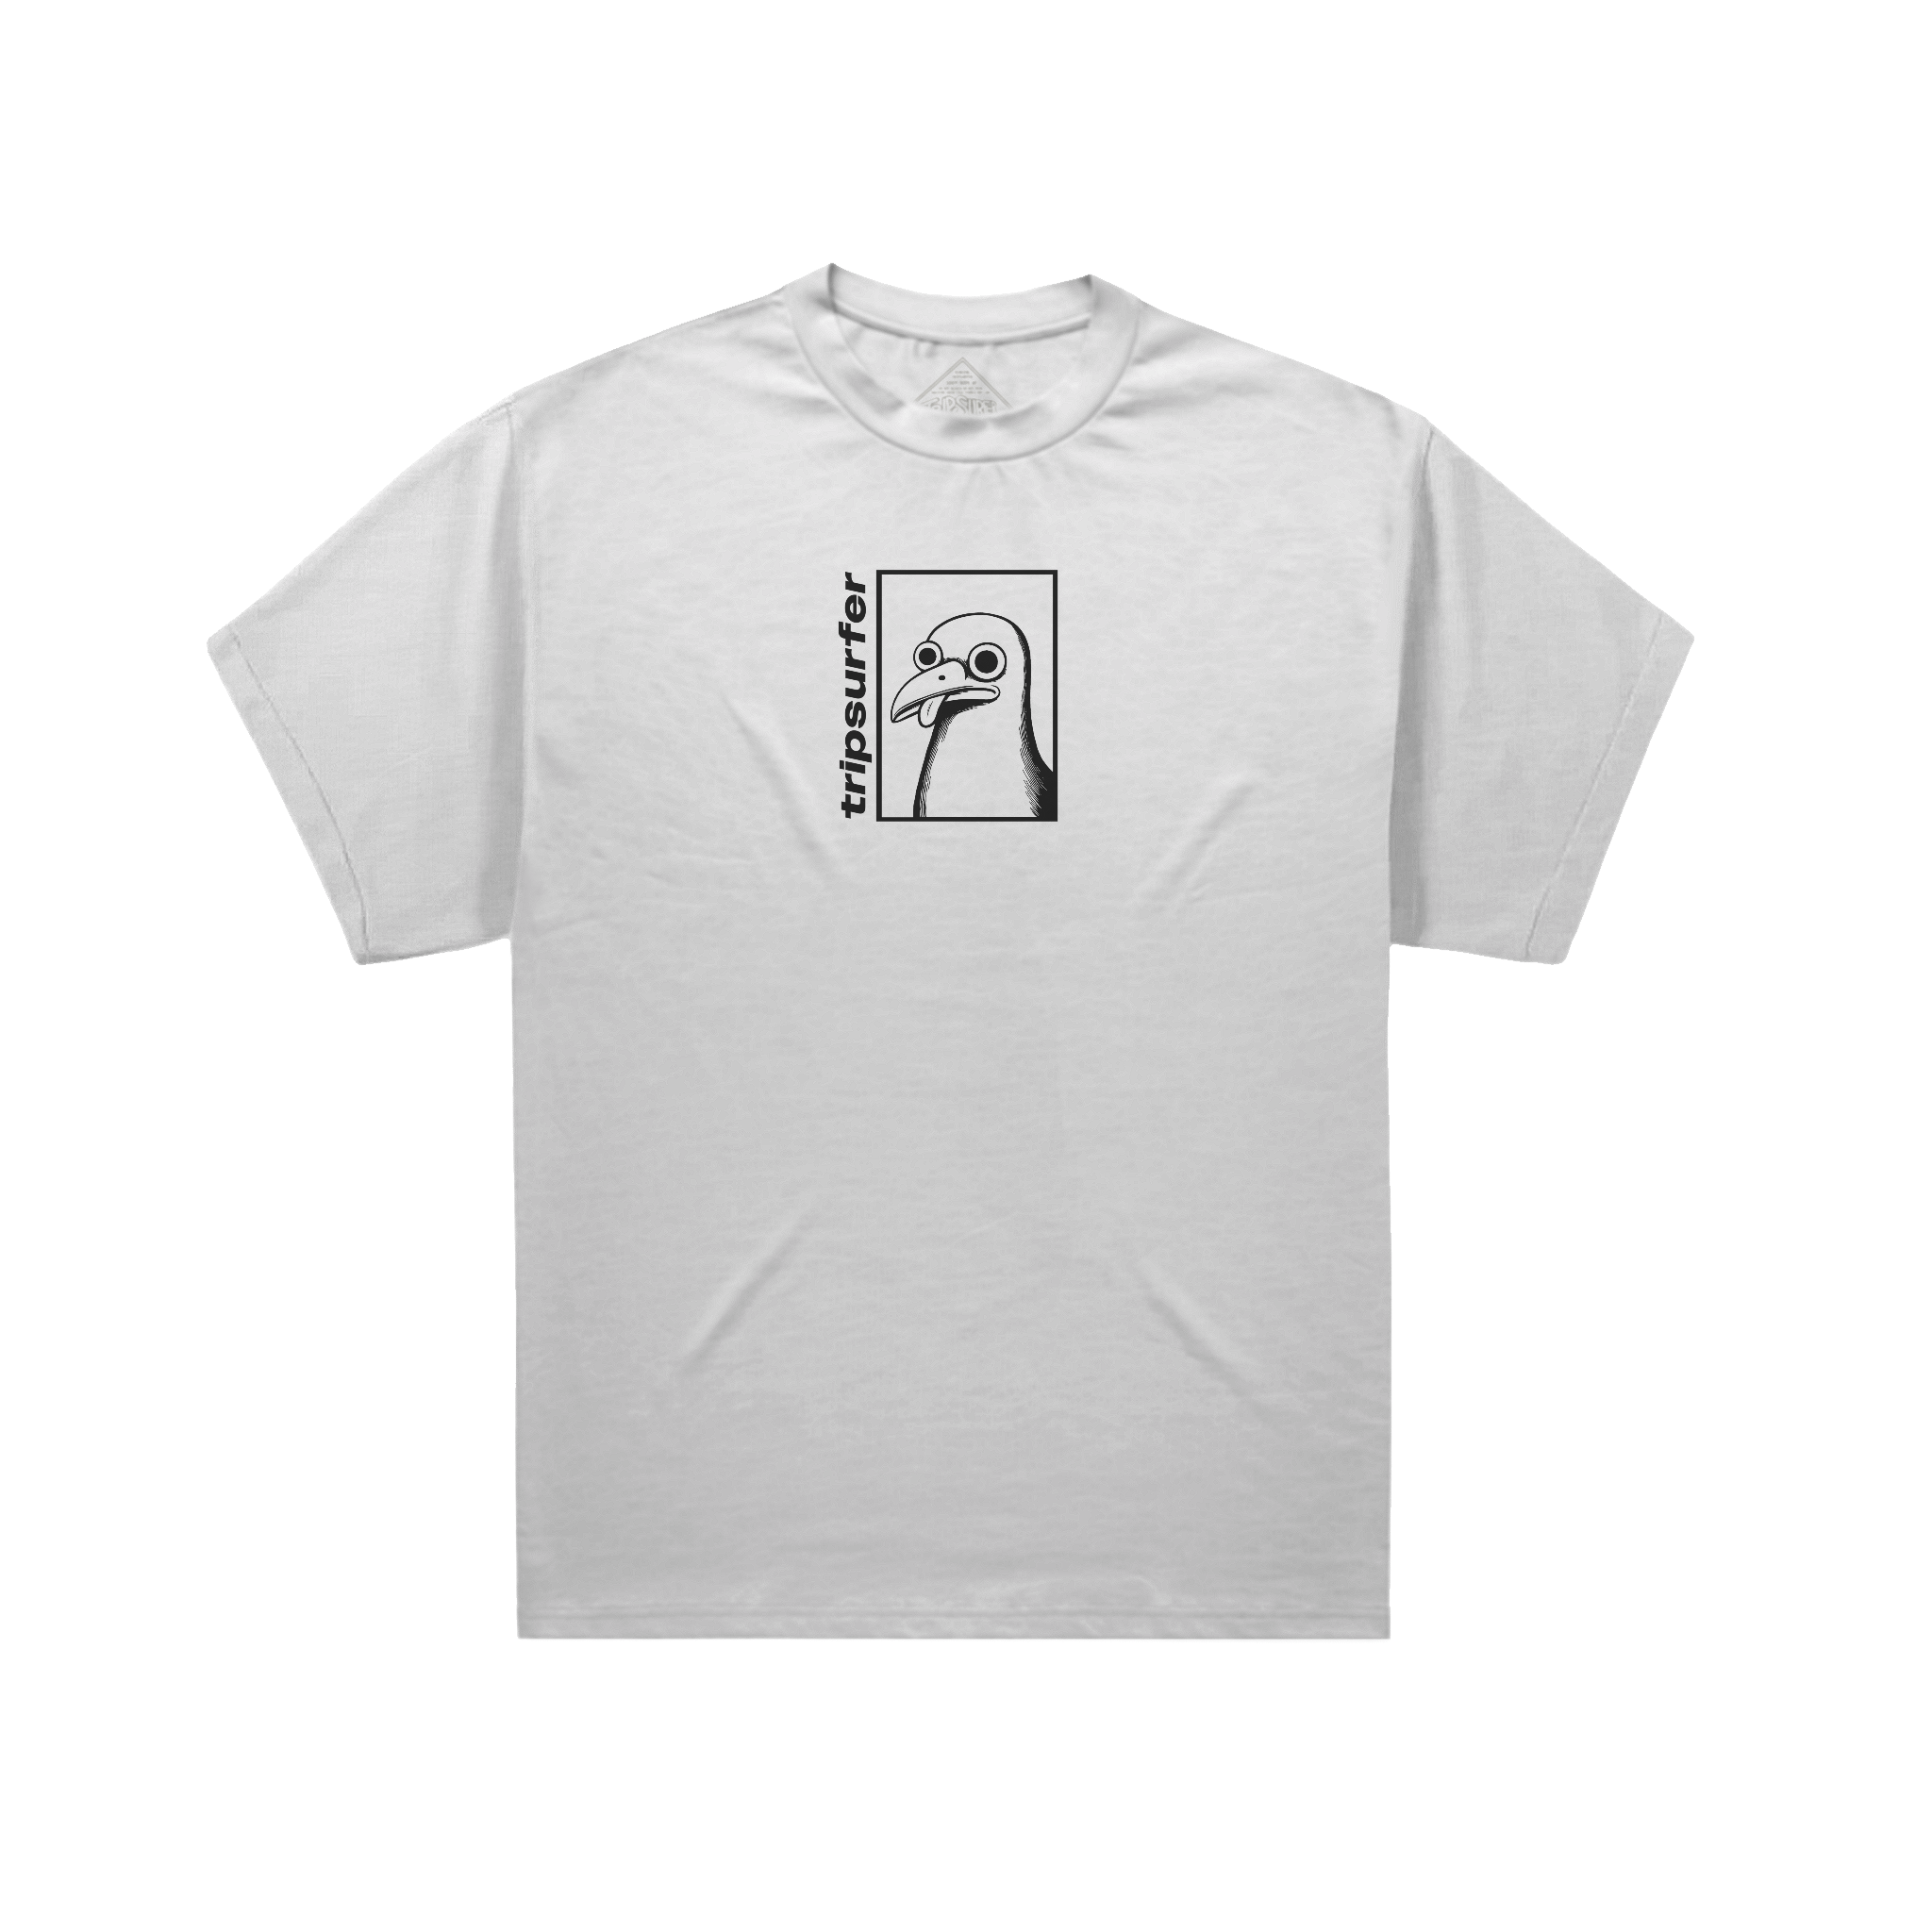 A white tee shirt with a TripSurfer Seagull on the front.